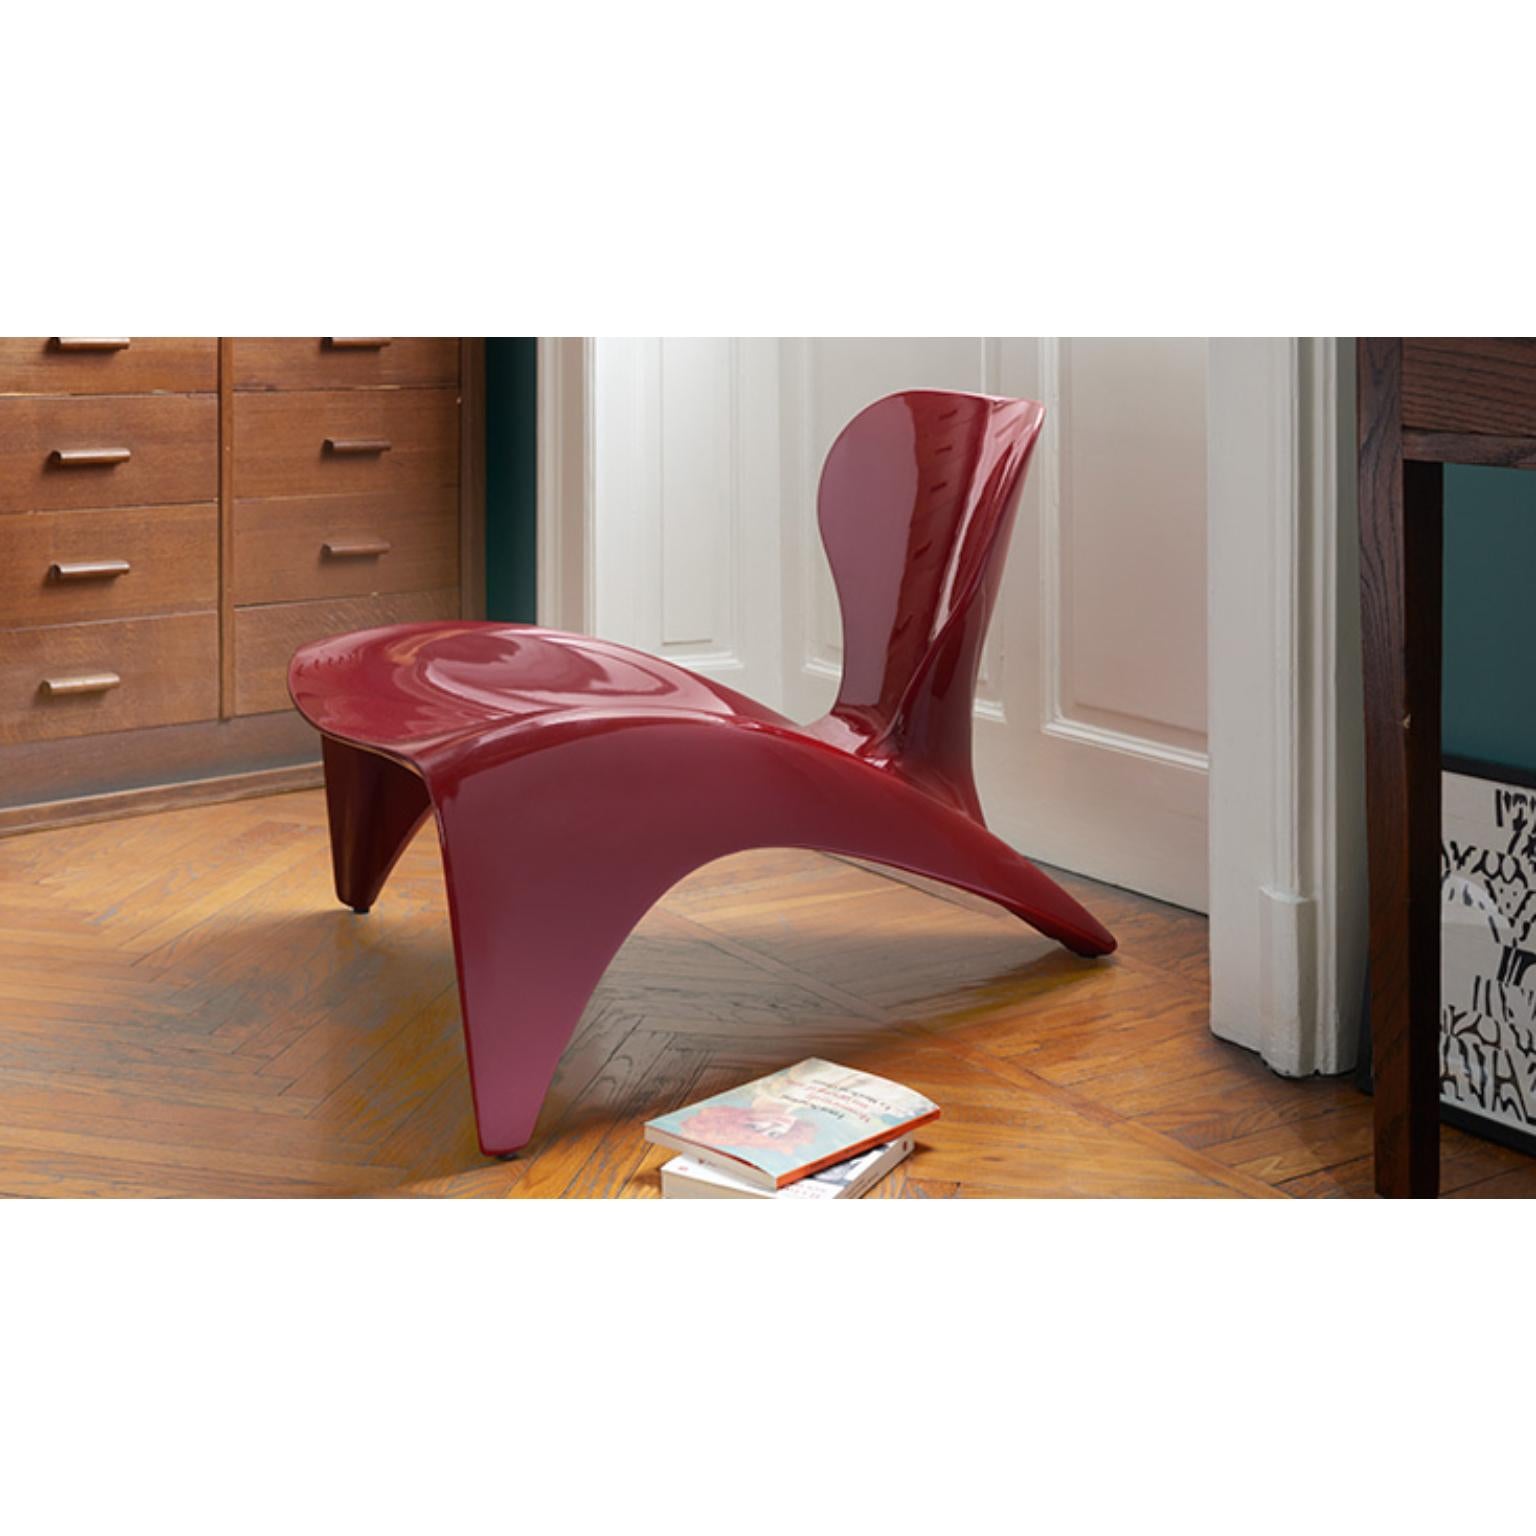 Glossy Supreme Red Isetta Low Chair by Marc Sadler
Dimensions: D 86 x W 78 x H 62 cm. Seat Height: 32 cm.
Materials: Polyurethane.
Weight: 13 kg.

Available in different lacquered color options. Available in glossy or matte finishes. This product is